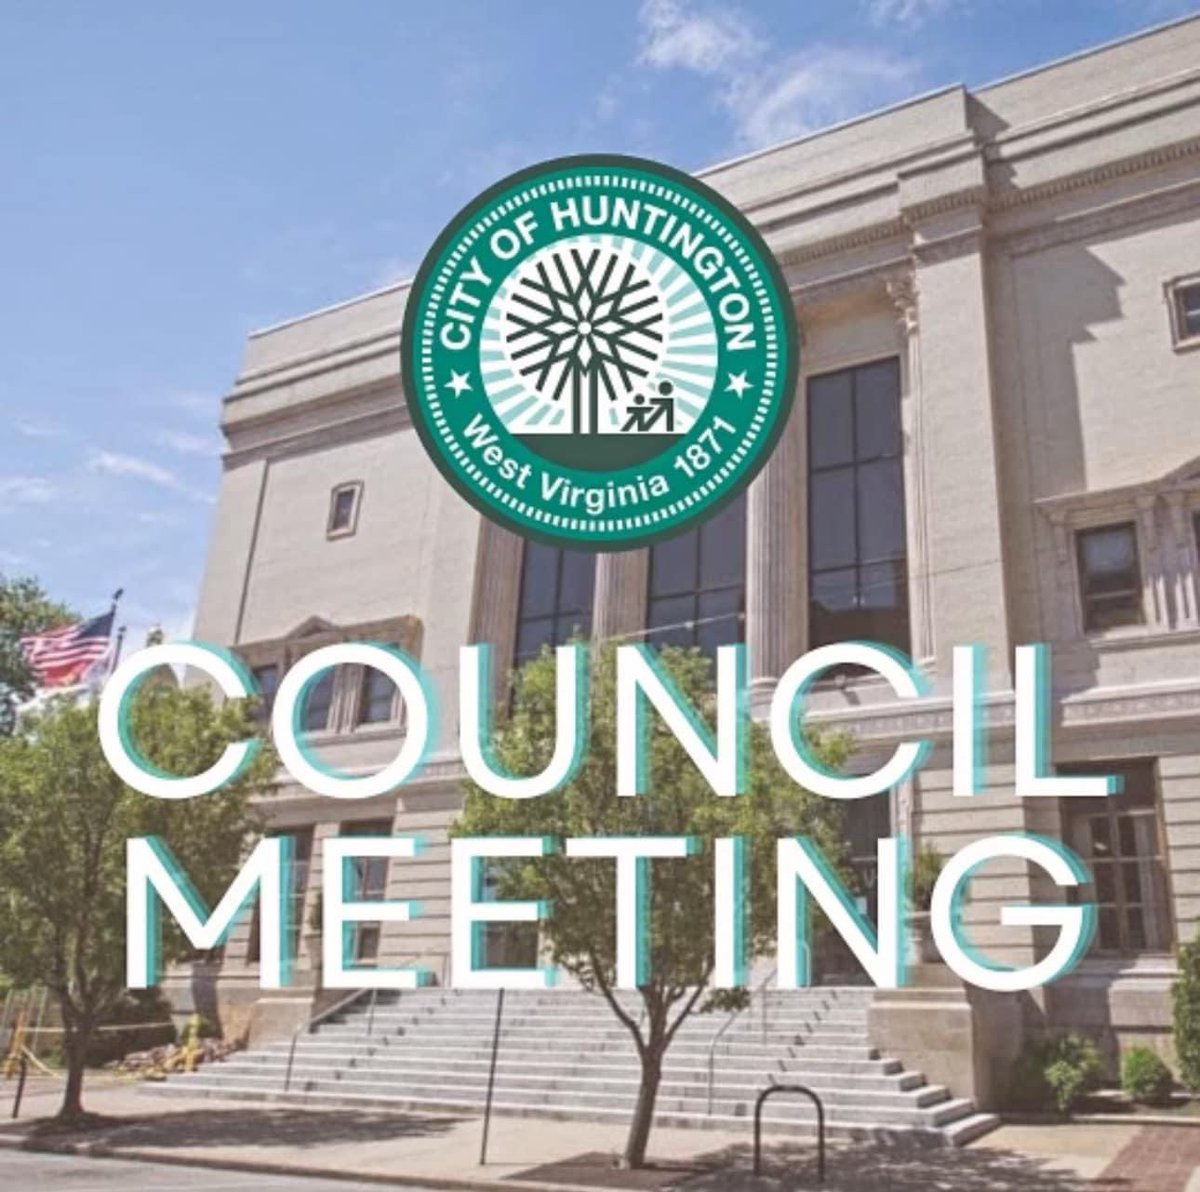 Huntington City Council meets at 7:30 p.m. today, March 11. The meeting and all committee meetings beforehand will be streamed live on the City of Huntington’s Facebook page. To view the agendas for the meetings, visit cityofhuntington.com/calendar/month….